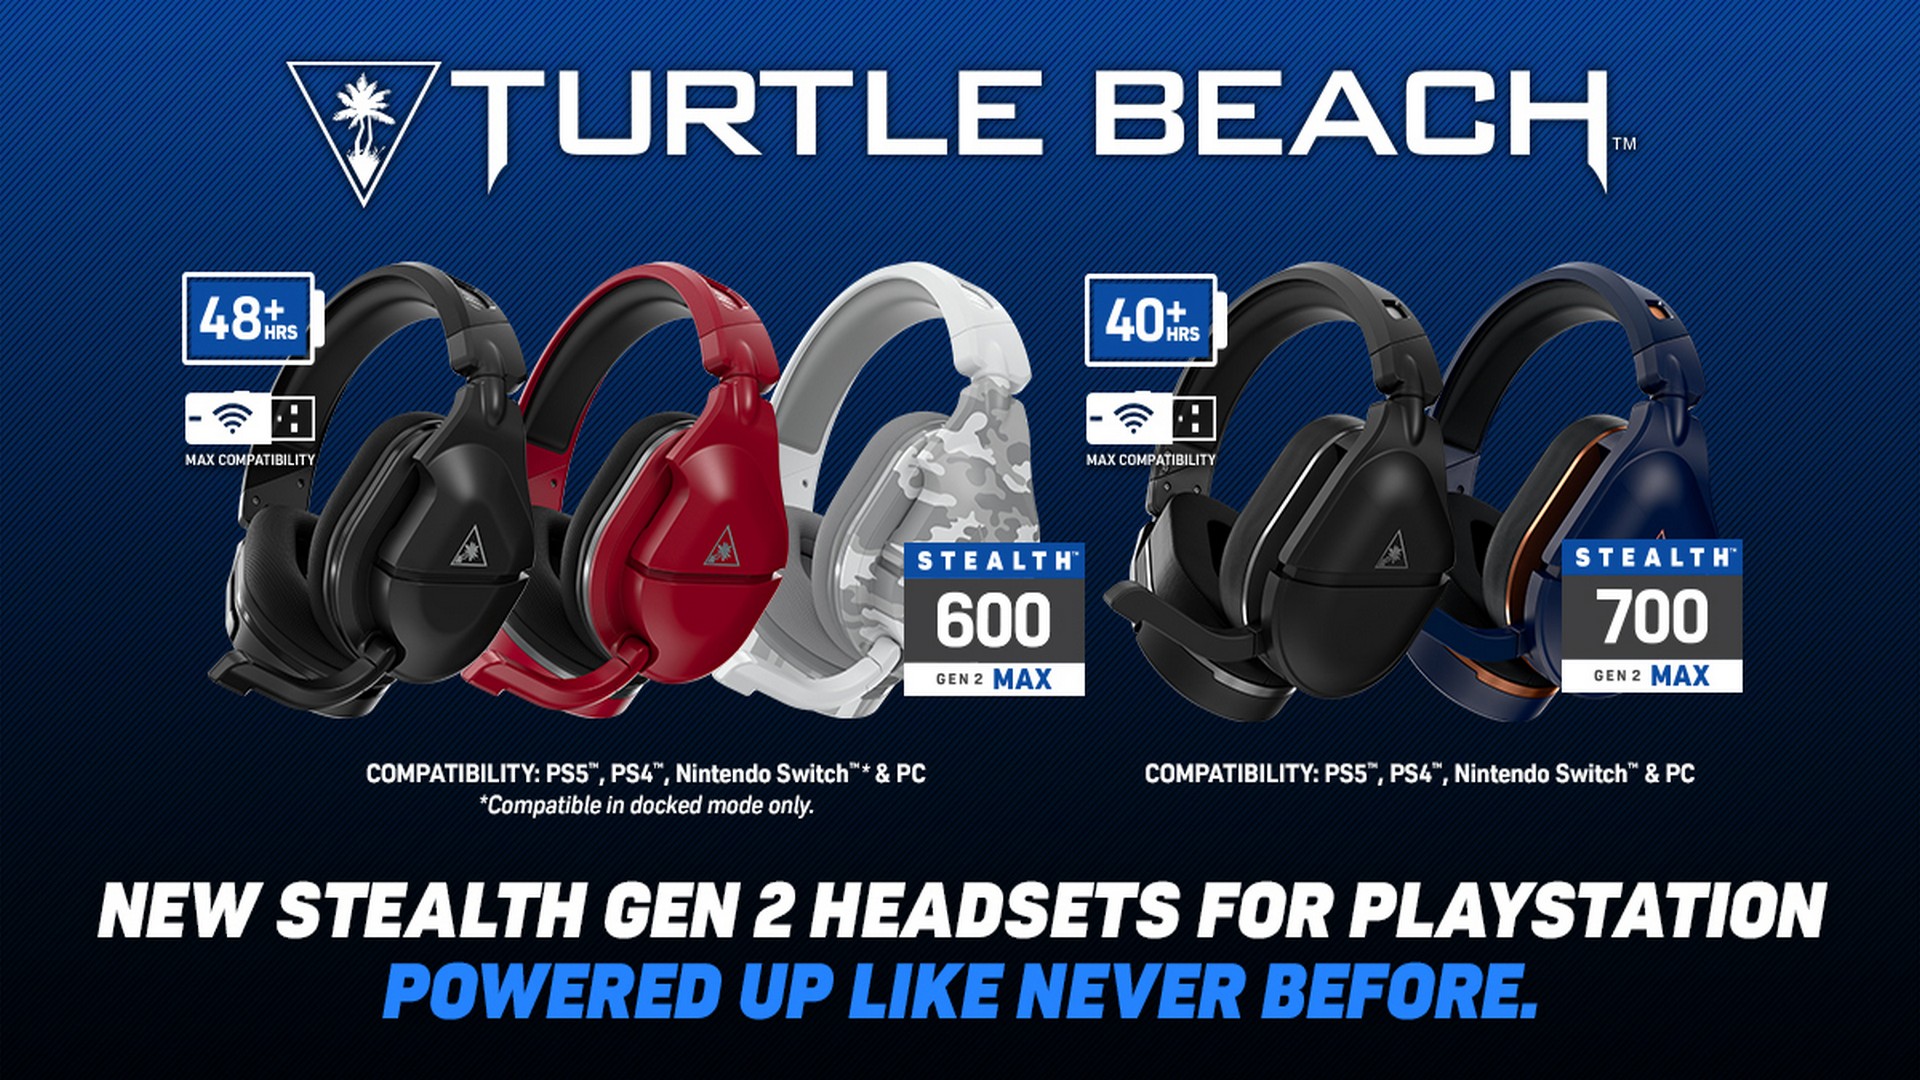 Turtle Beach’s Stealth 700 Gen 2 Max & Stealth 600 Gen 2 Max Series Wireless Gaming Headsets Coming To Playstation